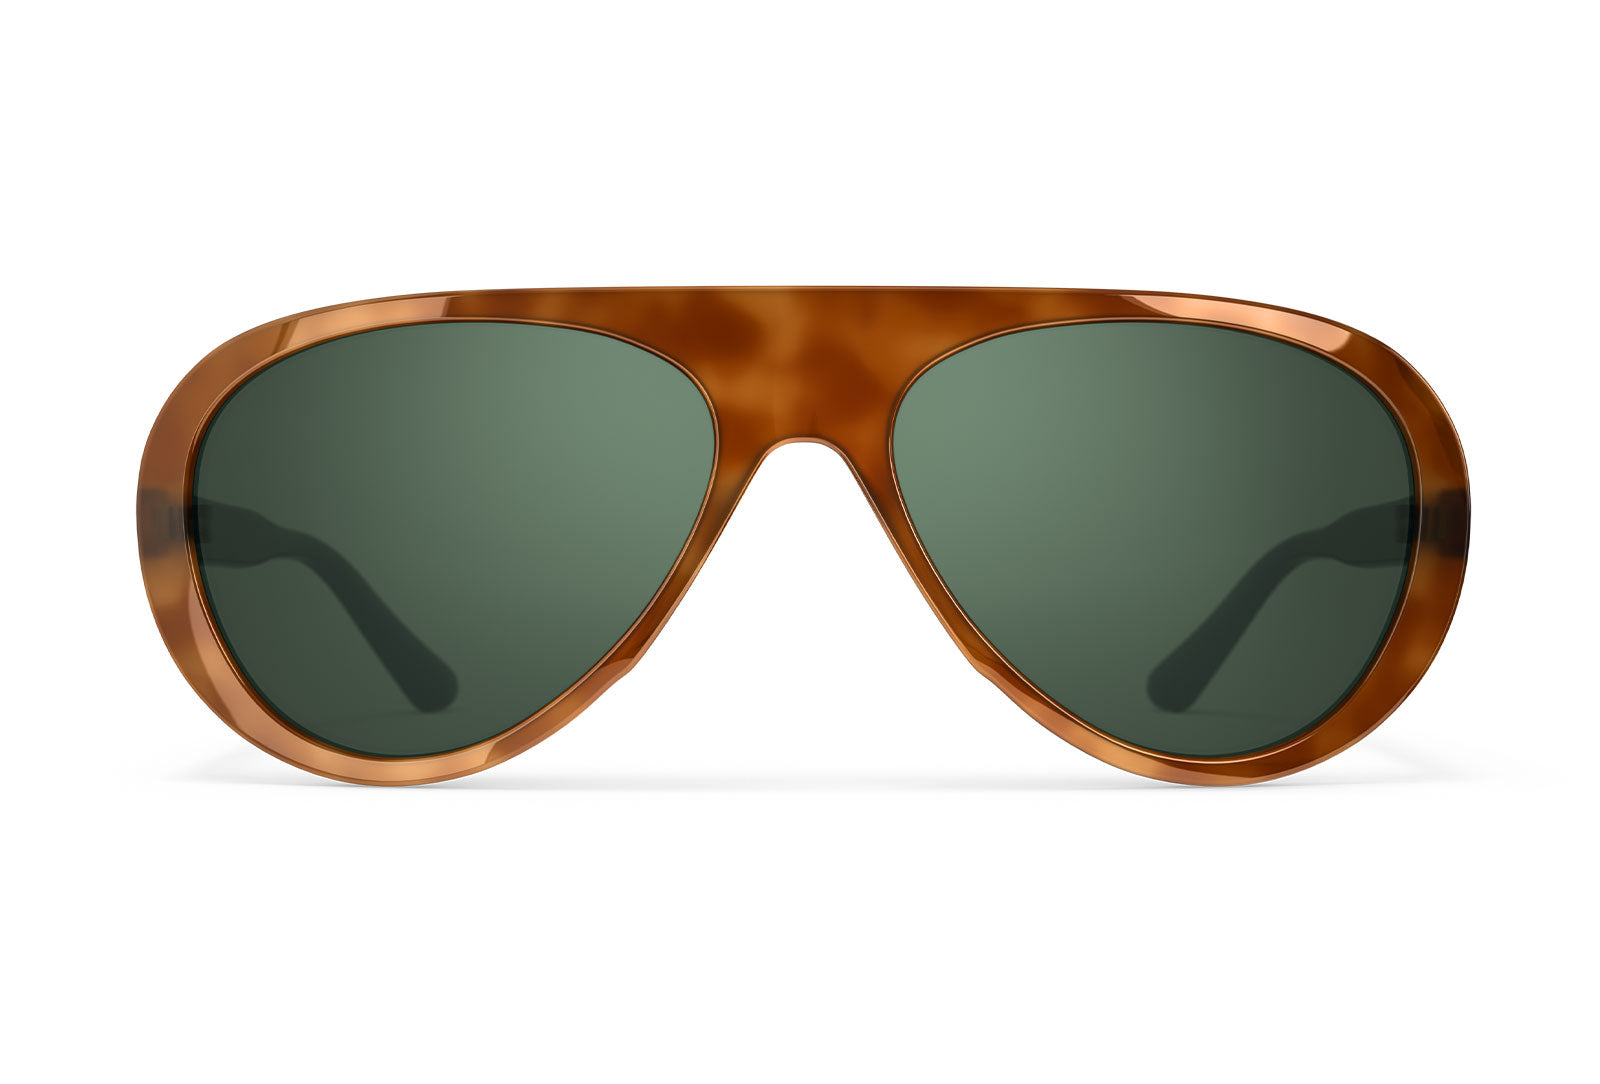 Fascinate Thicken Skabelse Surf Aviators - Iconic, Retro-inspired Sunglasses for the Beach – VALLON®